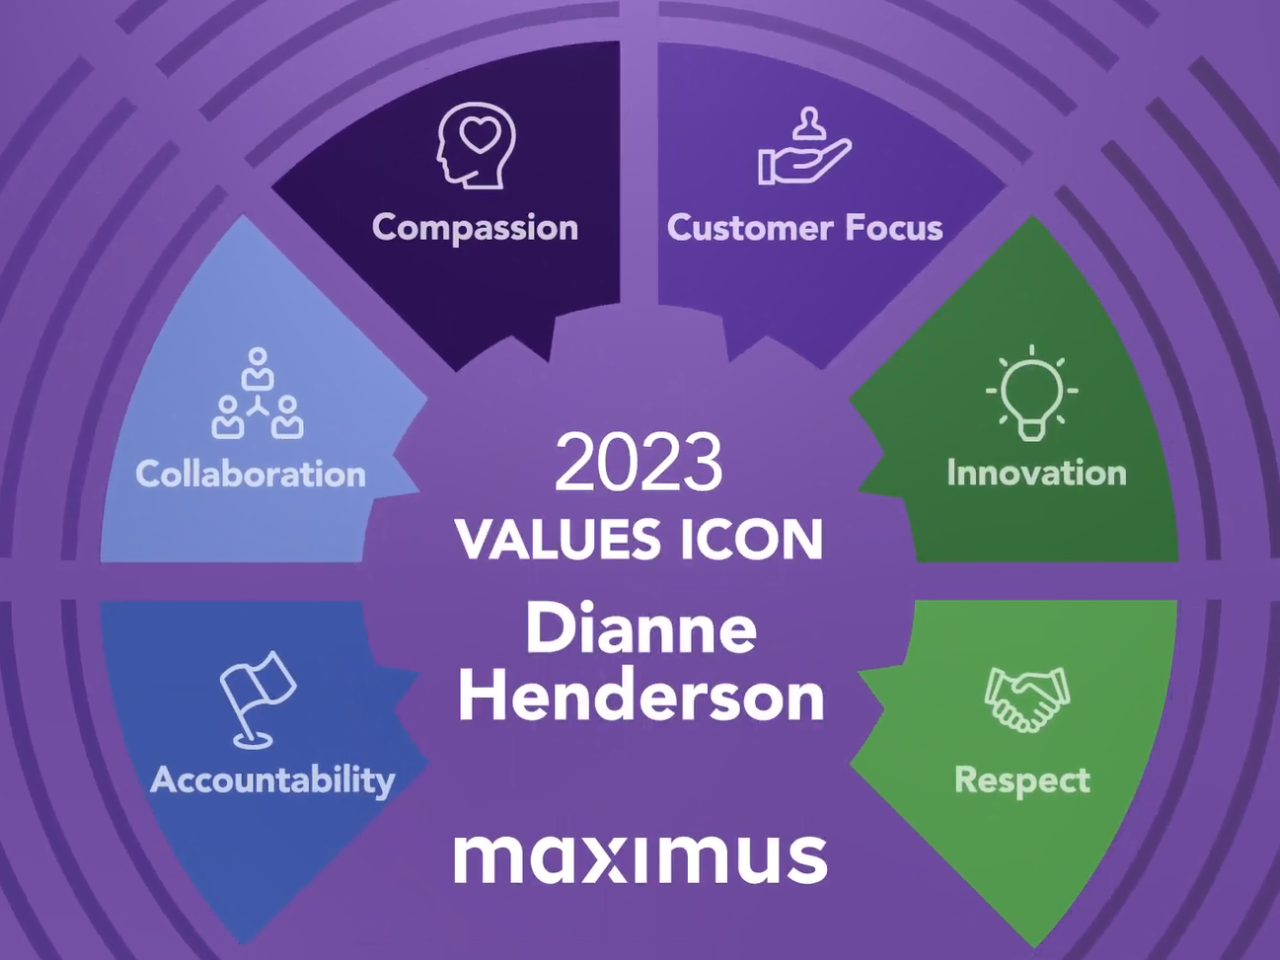 "2023 Values Icon Dianne Henderson" Six boxes in a semi-circle around the quote each with a symbol of a company value.